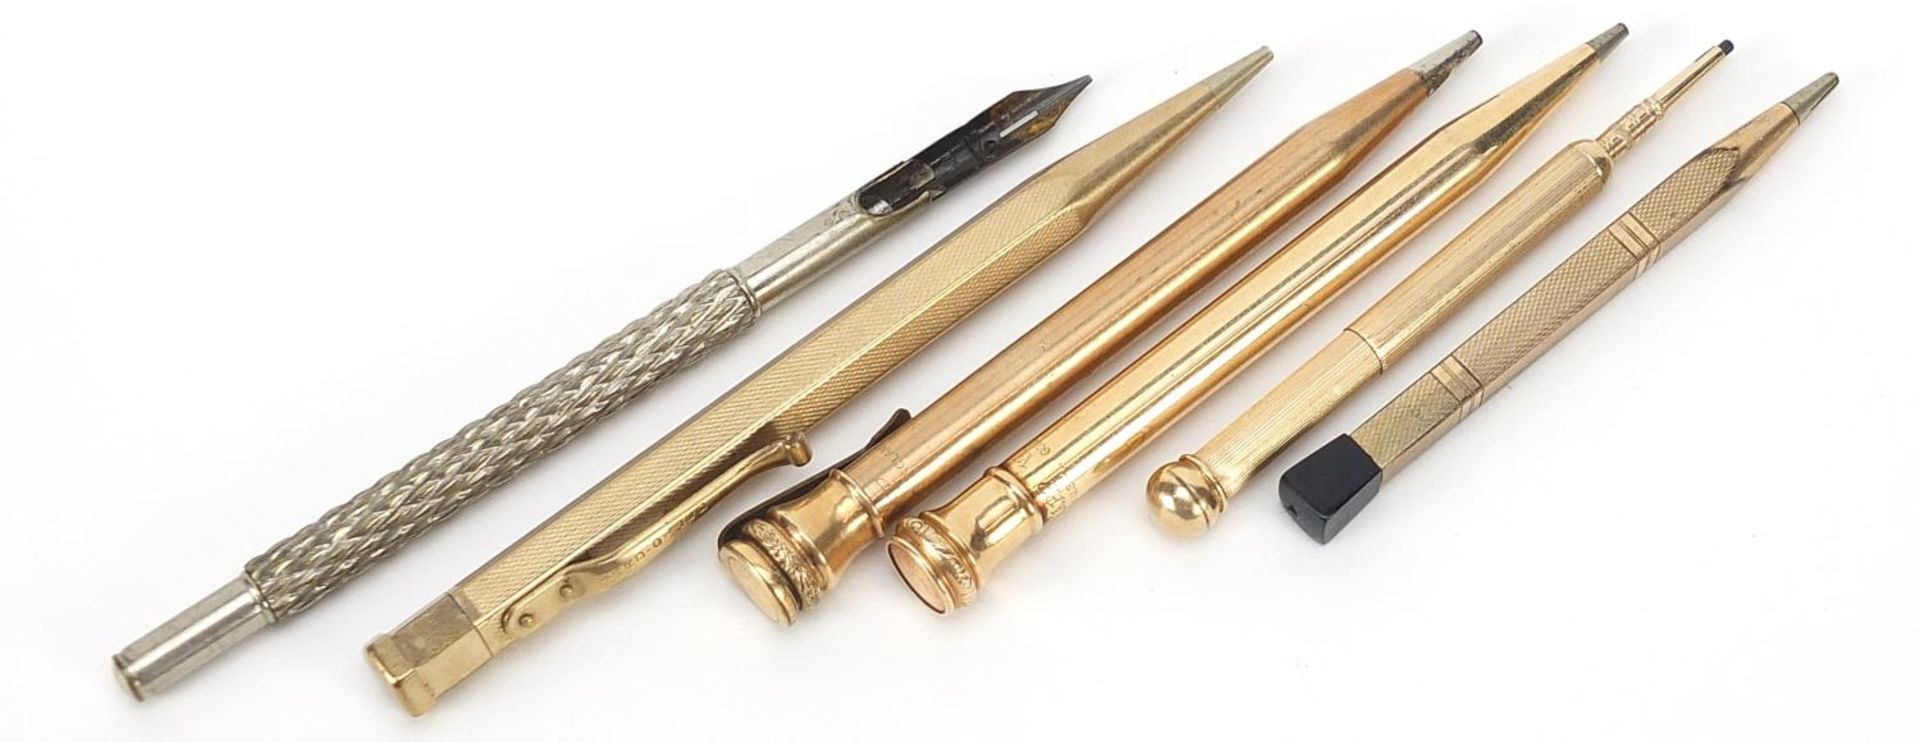 Five gold plated propelling pencils and a white metal dip pen, including Eversharp and Yard-O-Led - Image 2 of 4